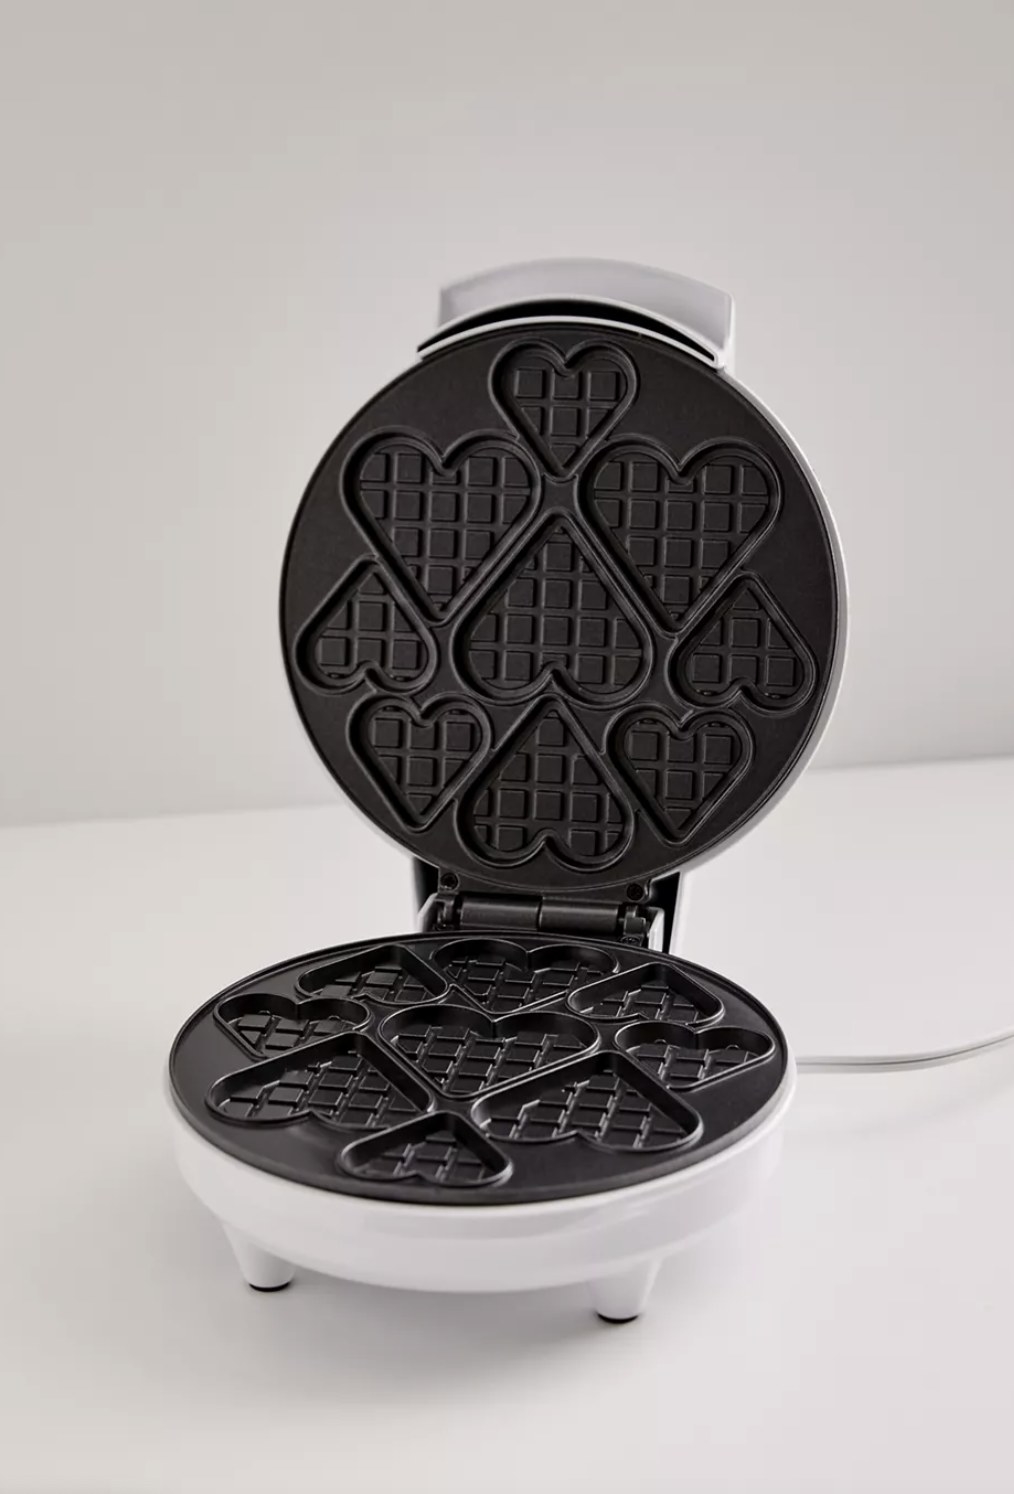 the waffle maker